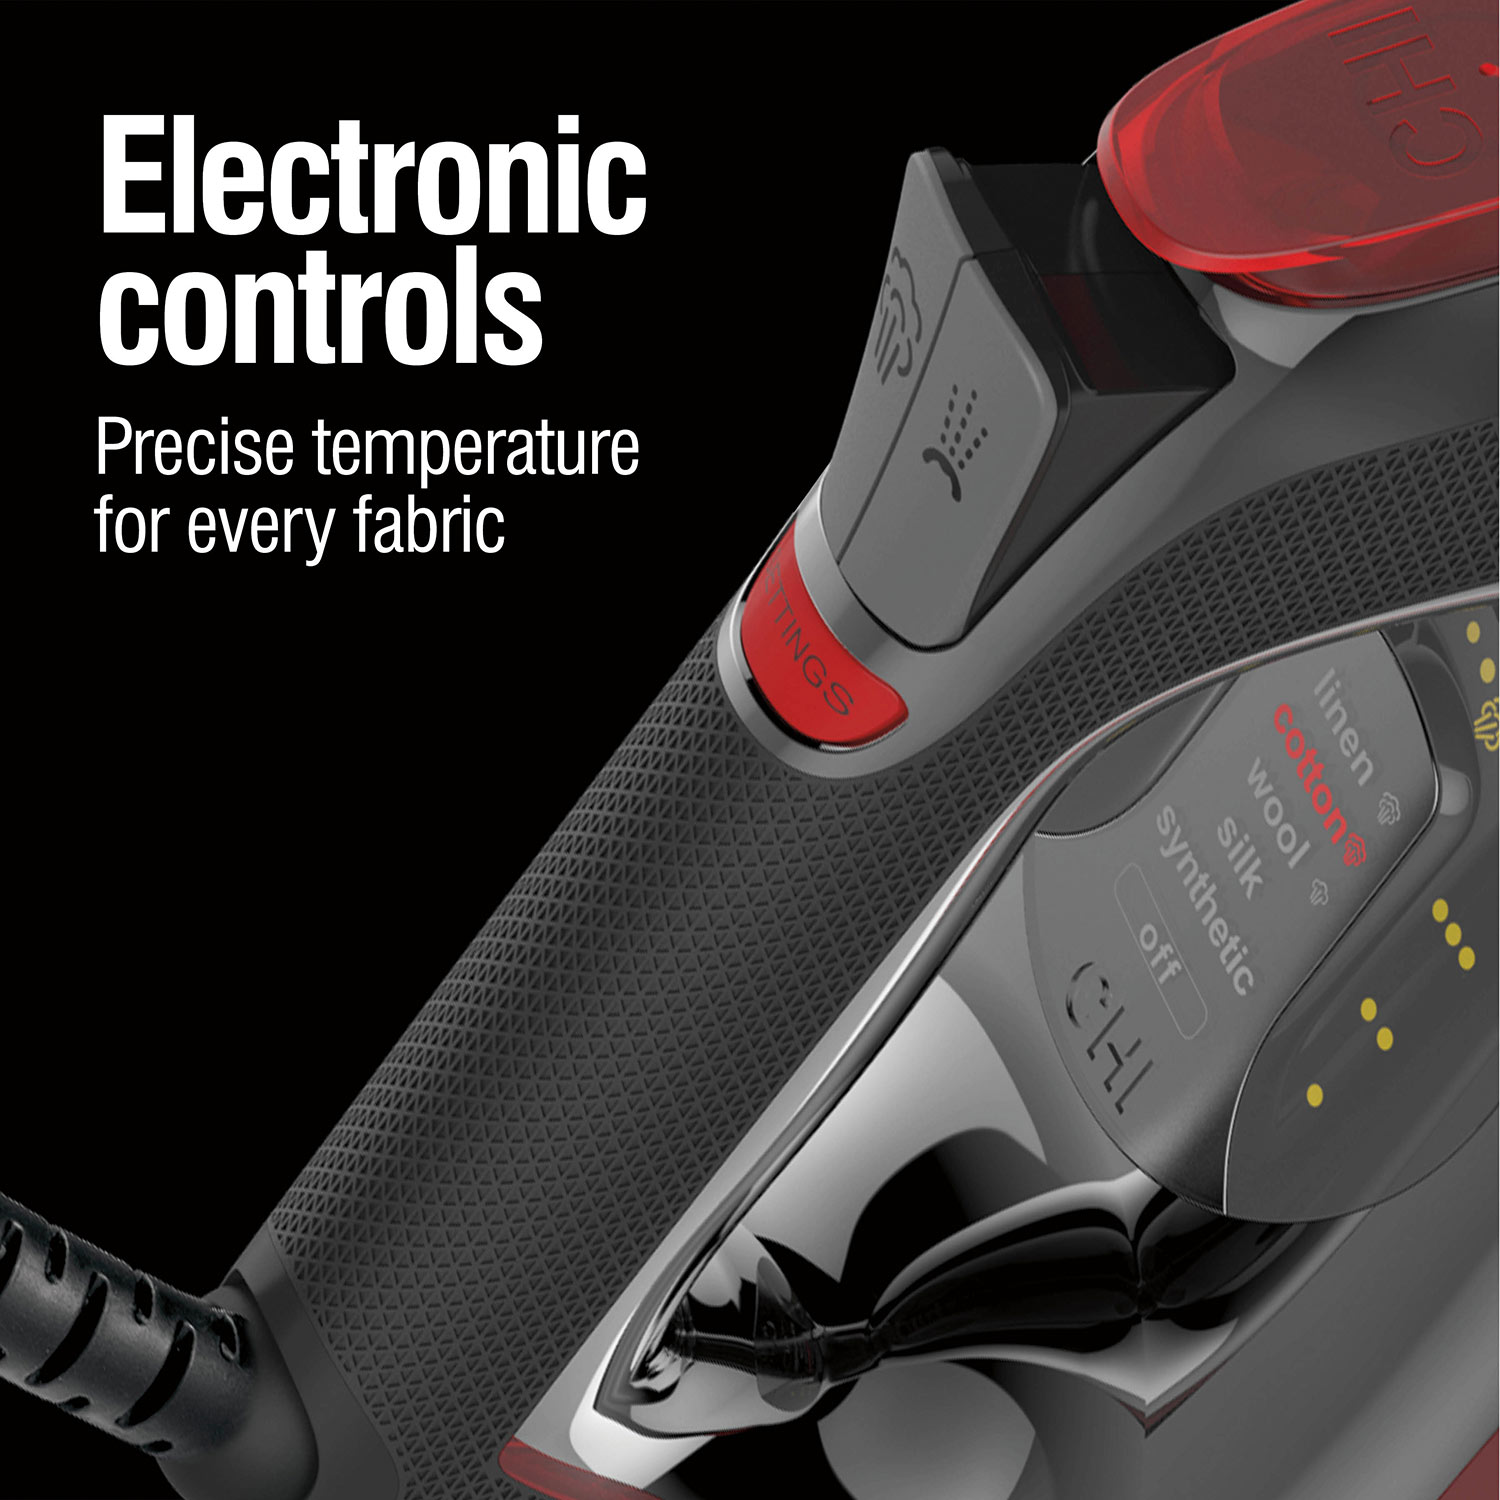 Electronic controls, precise temperature for every fabric